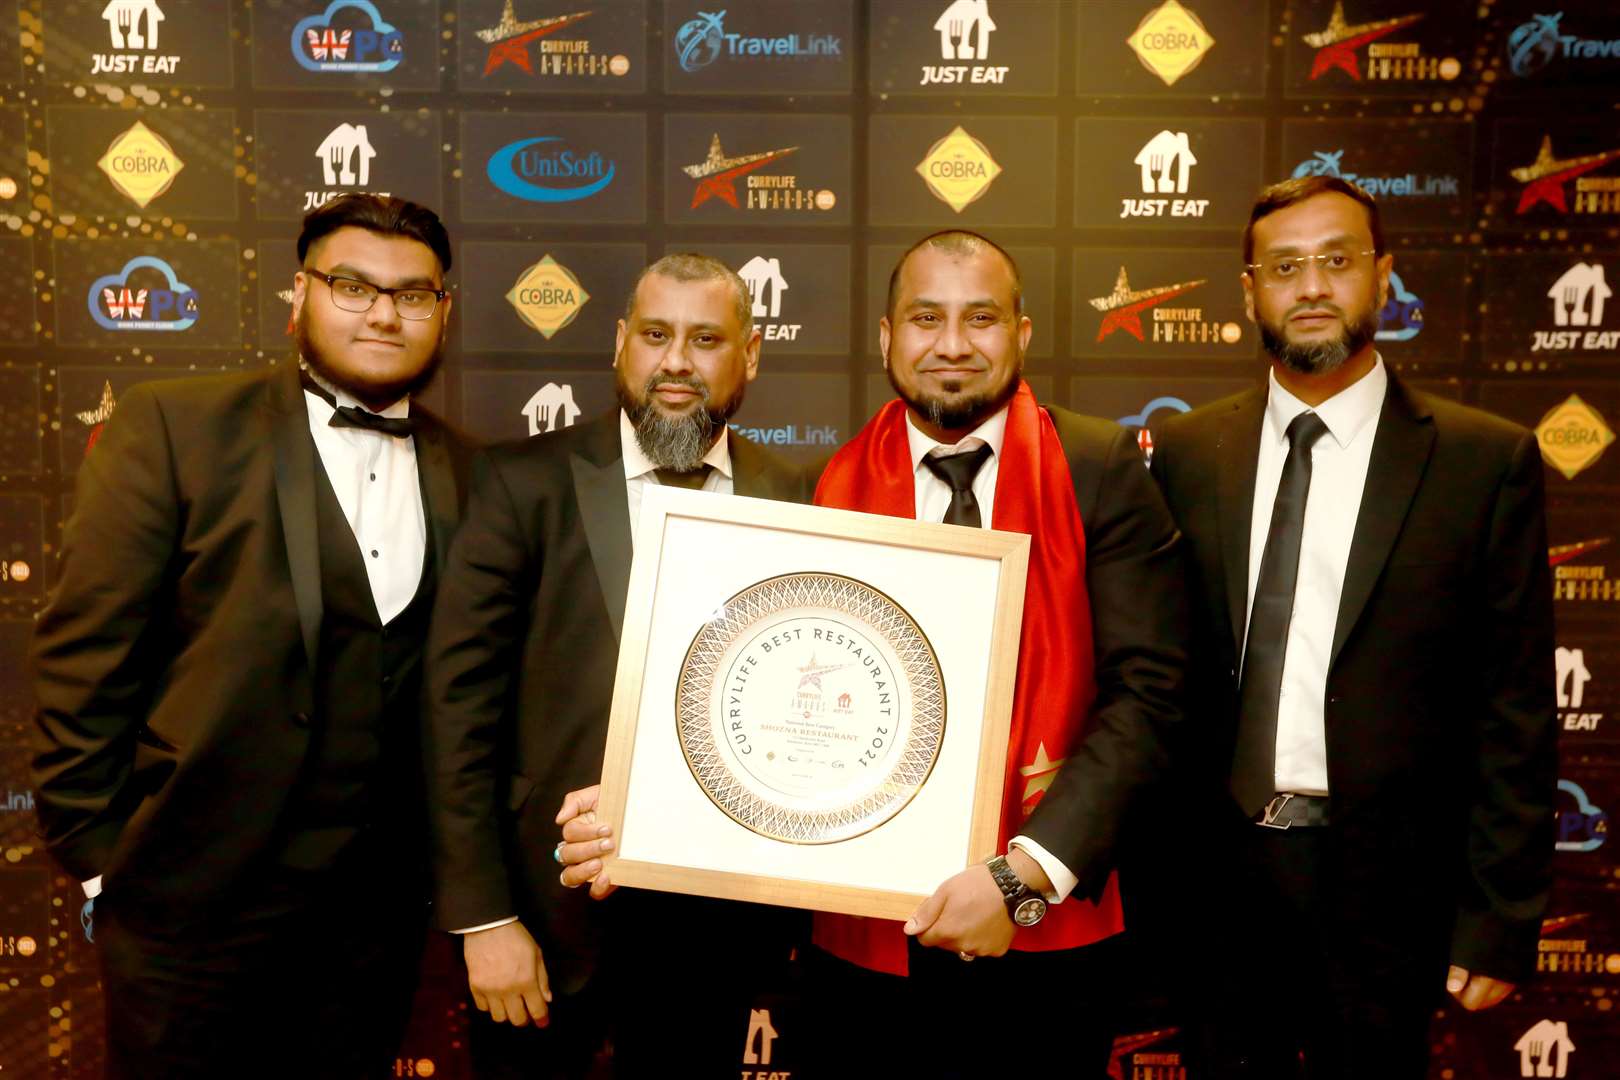 From left to right: Shozna team, Raffe Ahmed, Jalal Ahmed, Jamal Ahmed and Rose Ahmed with their Curry Life award. Photo: Curry Life Magazine